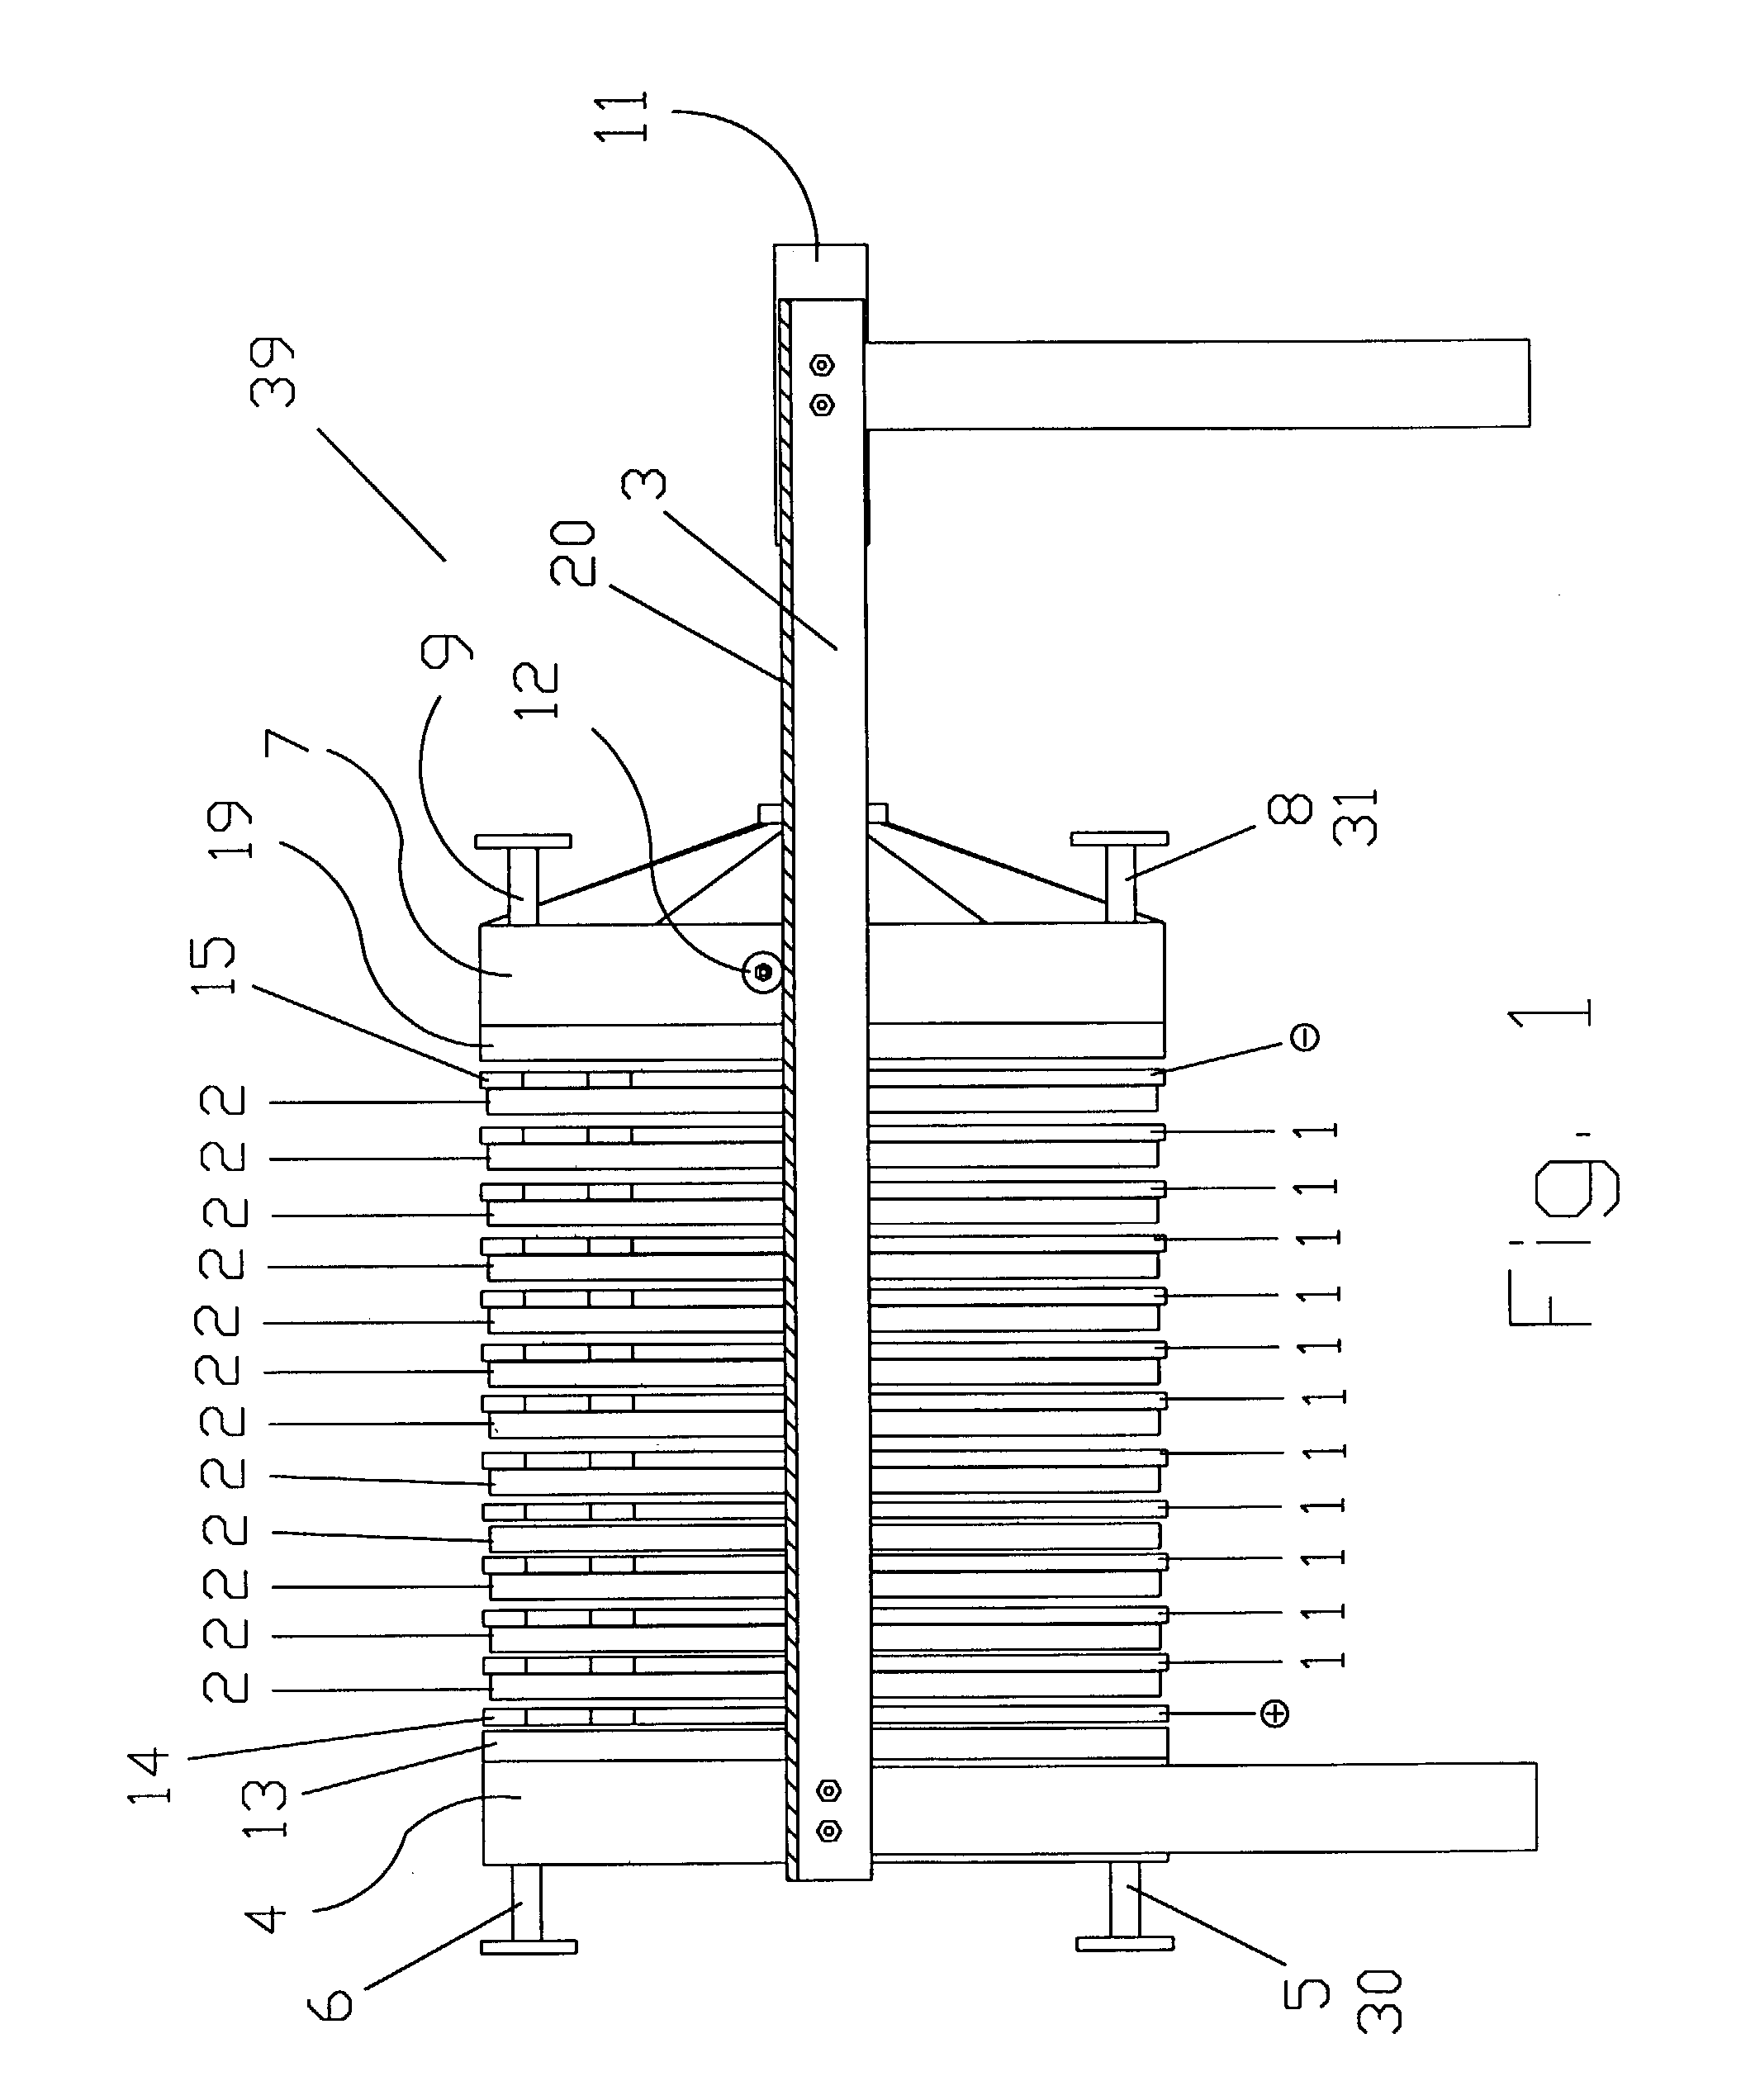 Industrial wastewater treatment and metals recovery apparatus